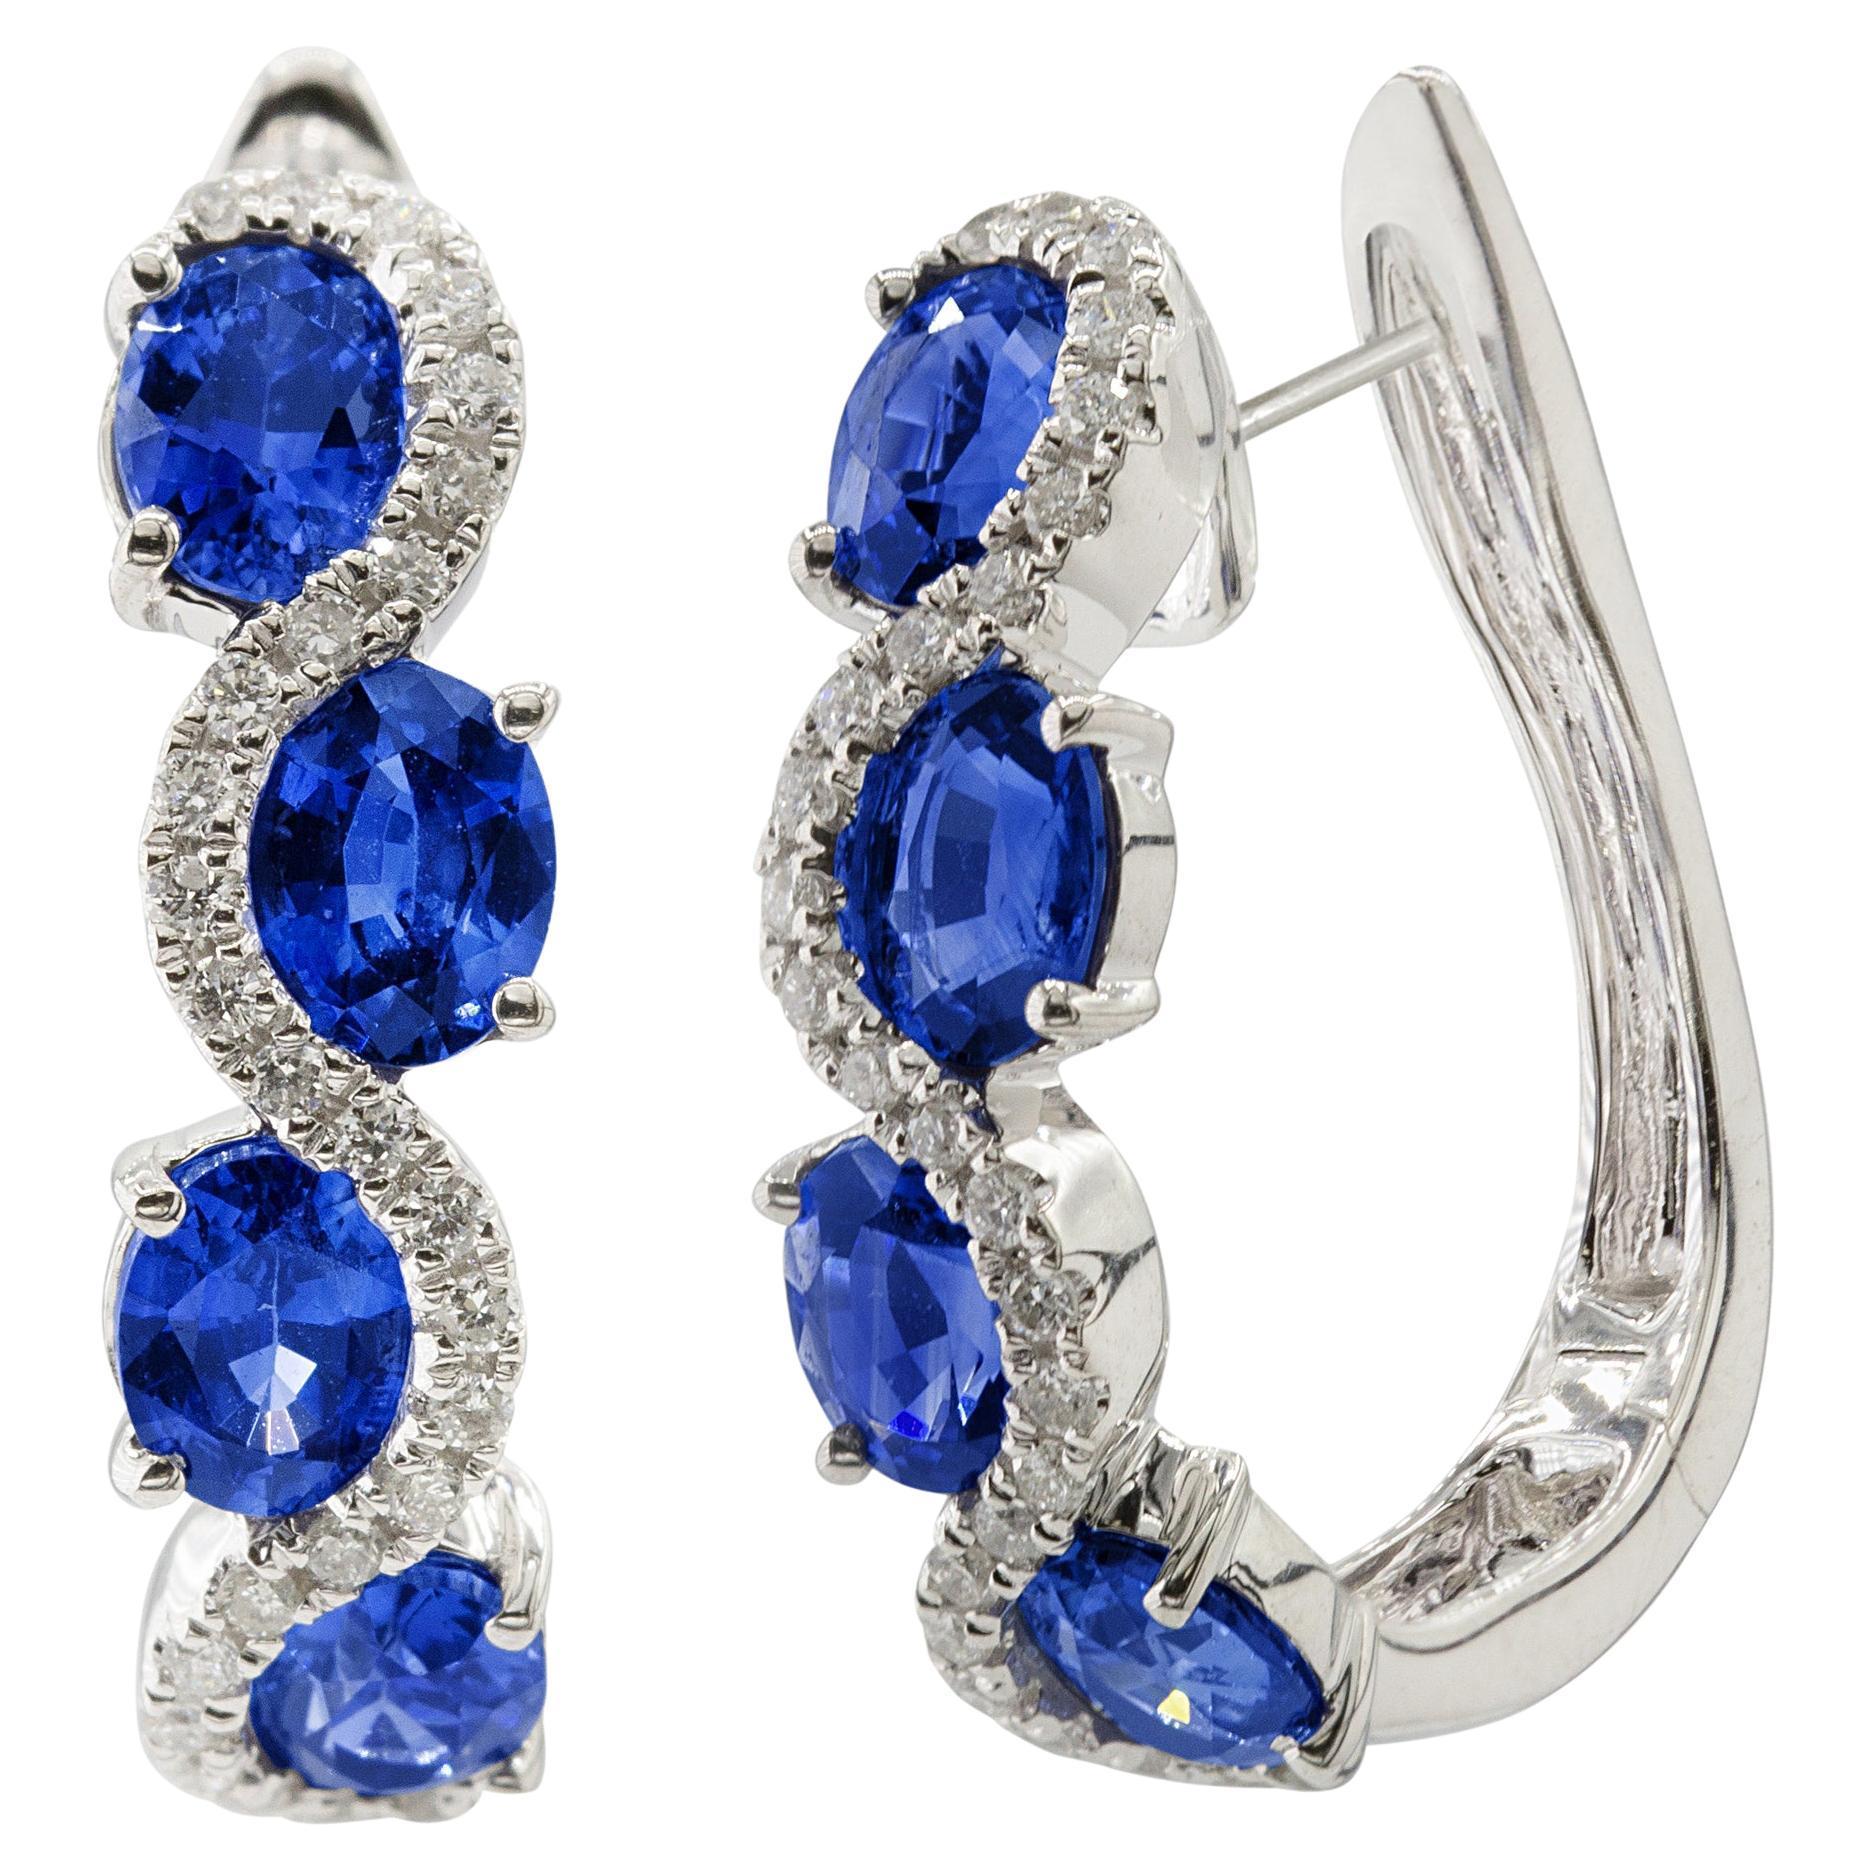 2.69 Carat Vivid Blue Oval Sapphire and Diamond Lever-Back Stud Earrings ref2085 For Sale